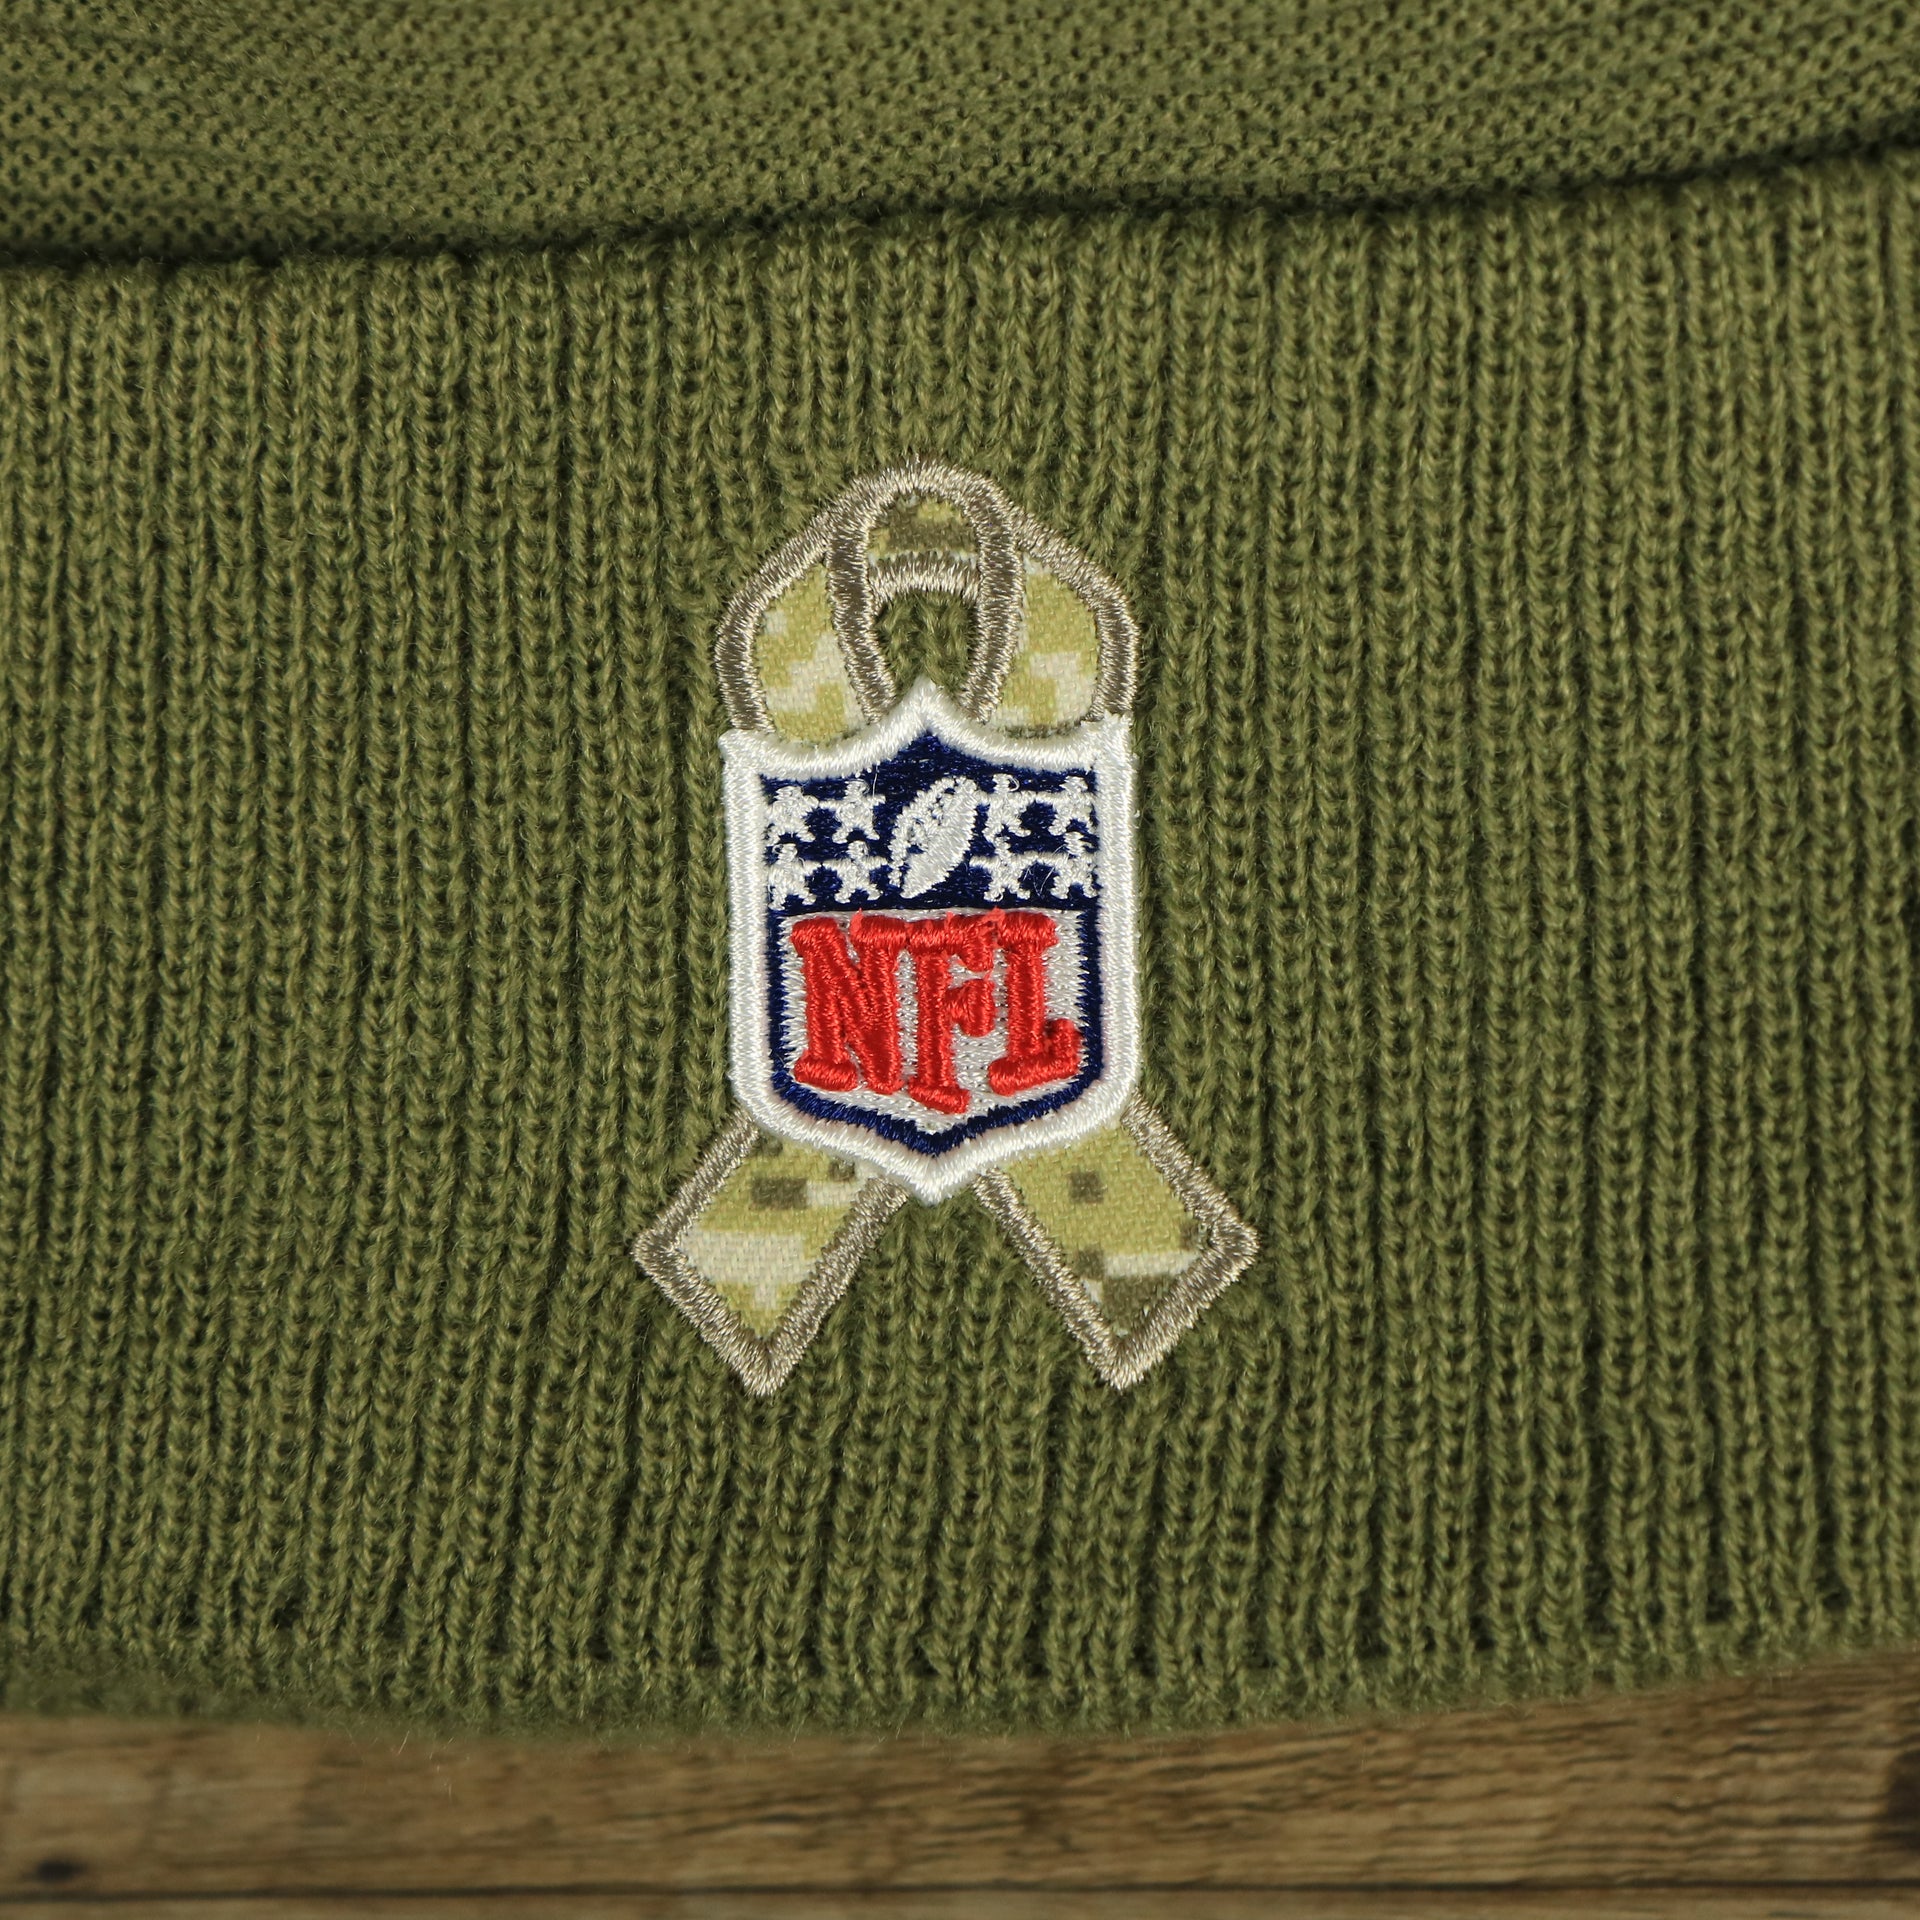 The NFL Ribbon on the Philadelphia Eagles Salute To Service Ribbon Rubber Military Eagles Patch On Field NFL Beanie | Military Green Beanie